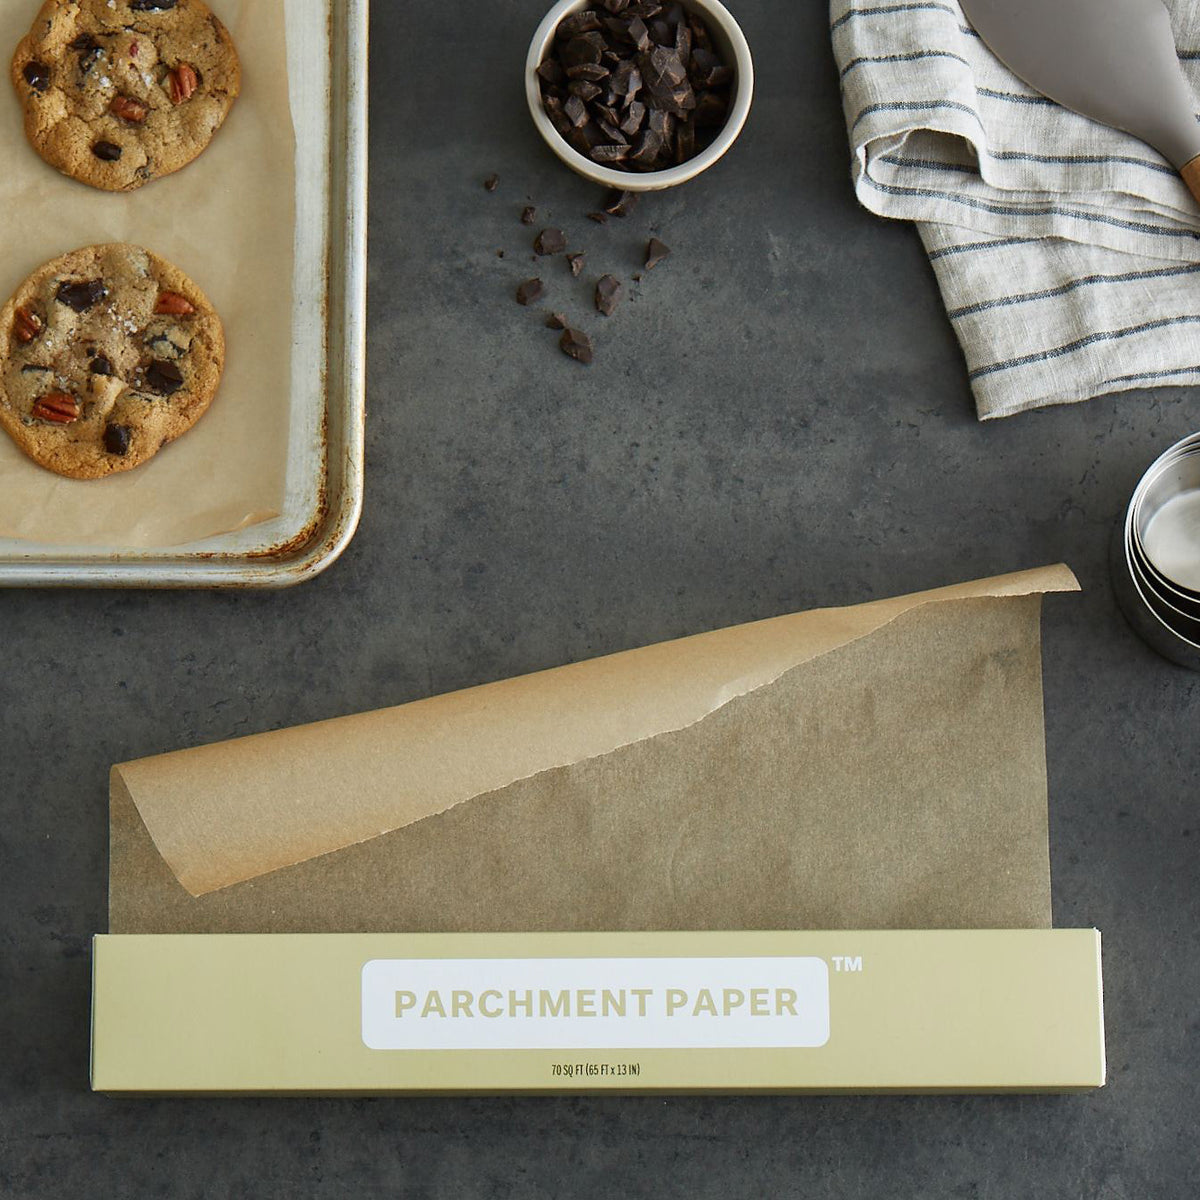 Lifestyle photo, parchment paper unfurled from box next to a baking tray lined with parchment paper with freshly baked chocolate chip and pecan cookies.